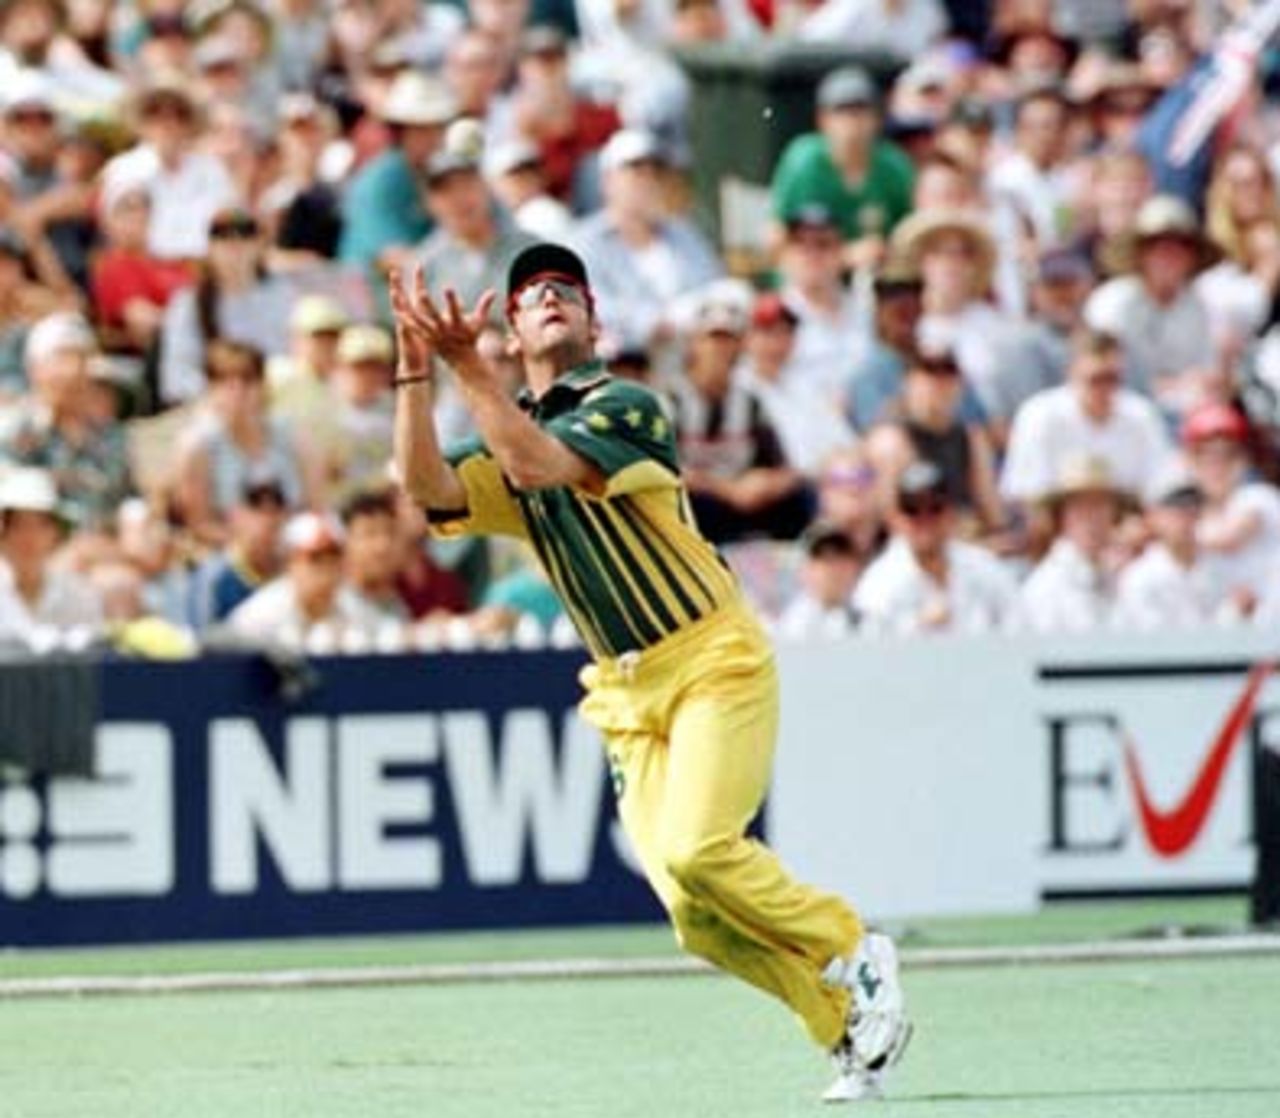 Michael Di Venuto lines up an outfield catch from McMillan off McGrath, but he dropped it......Australia v New Zealand ODI, at the Adelaide Oval, Saturday December 7th 1997.